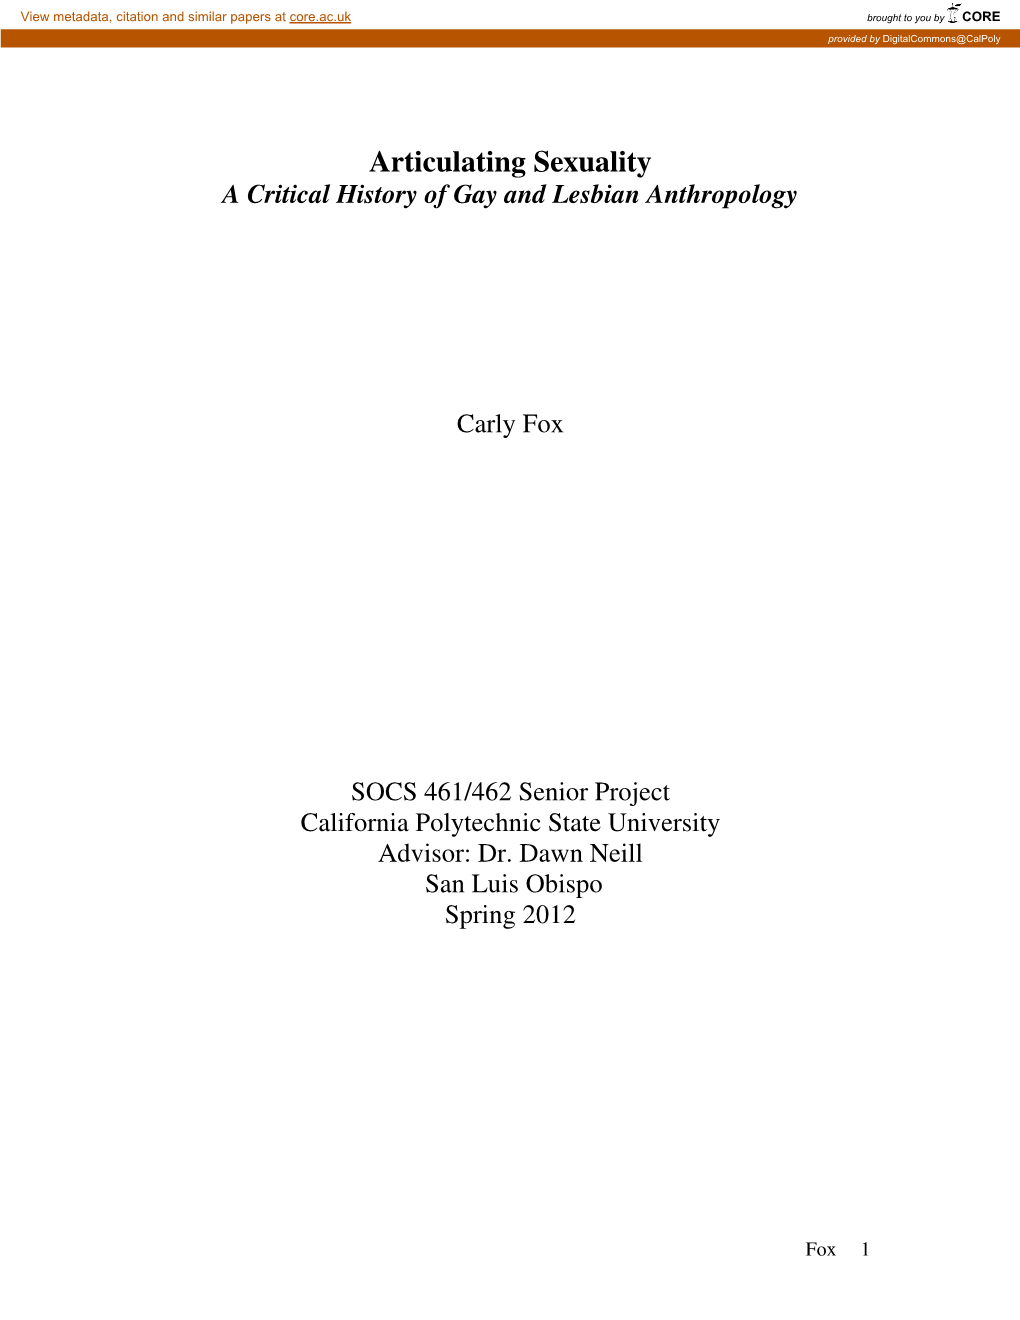 A Critical History of Gay and Lesbian Anthropology